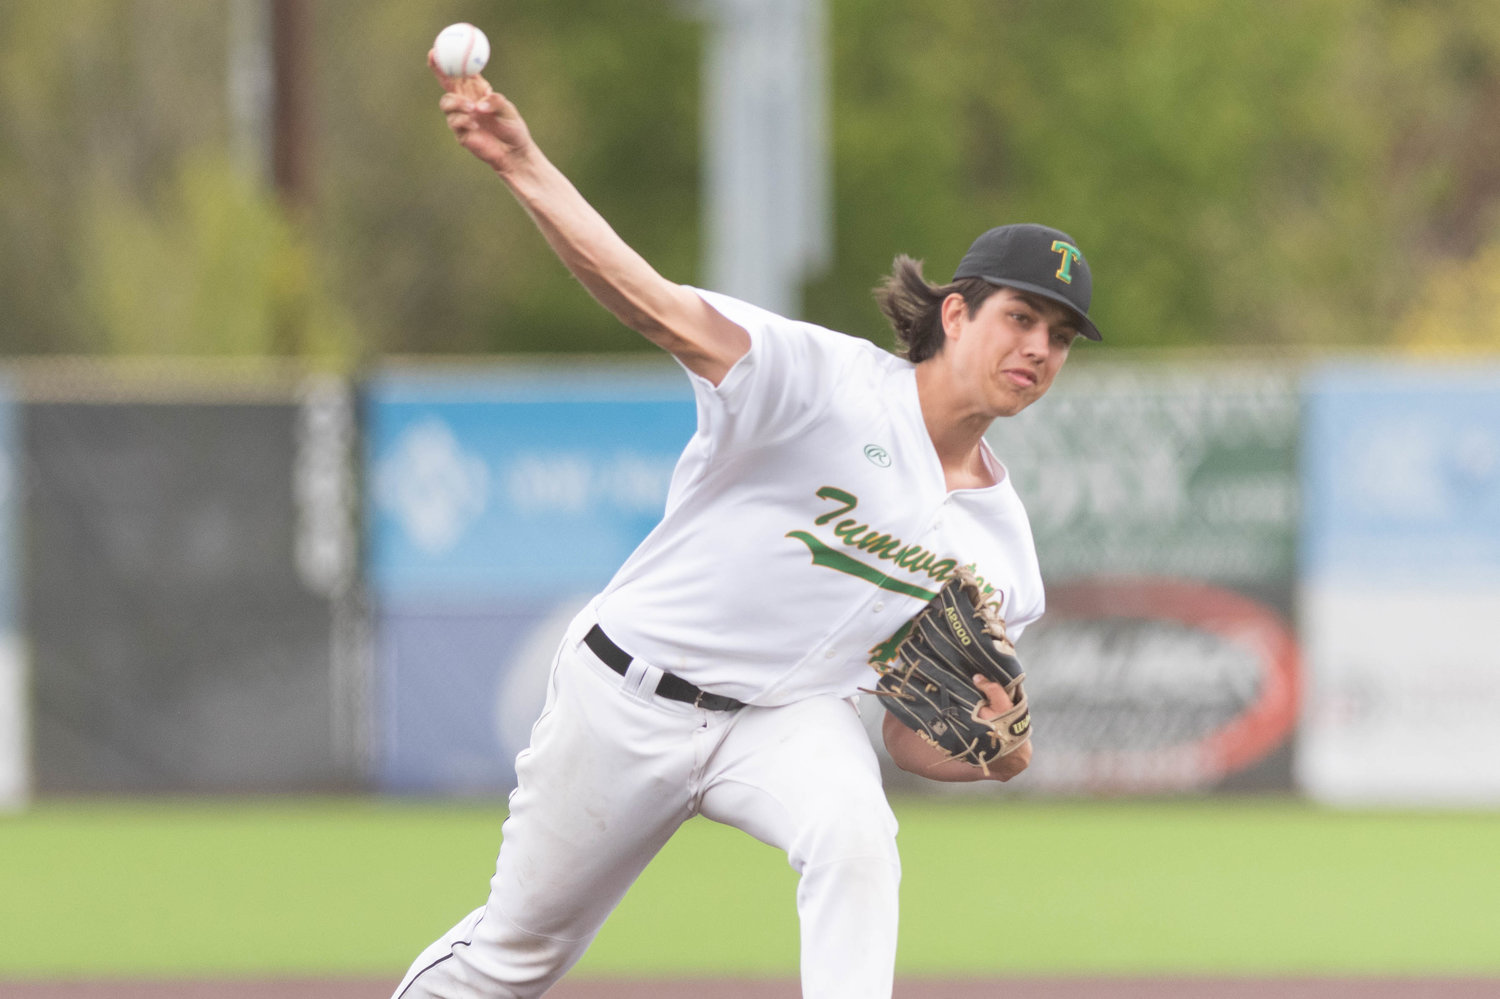 Tumwater's Jordan Hanson tosses a pitch against Shelton in the 2A District 4 semifinals May 11 at Ridgefield.